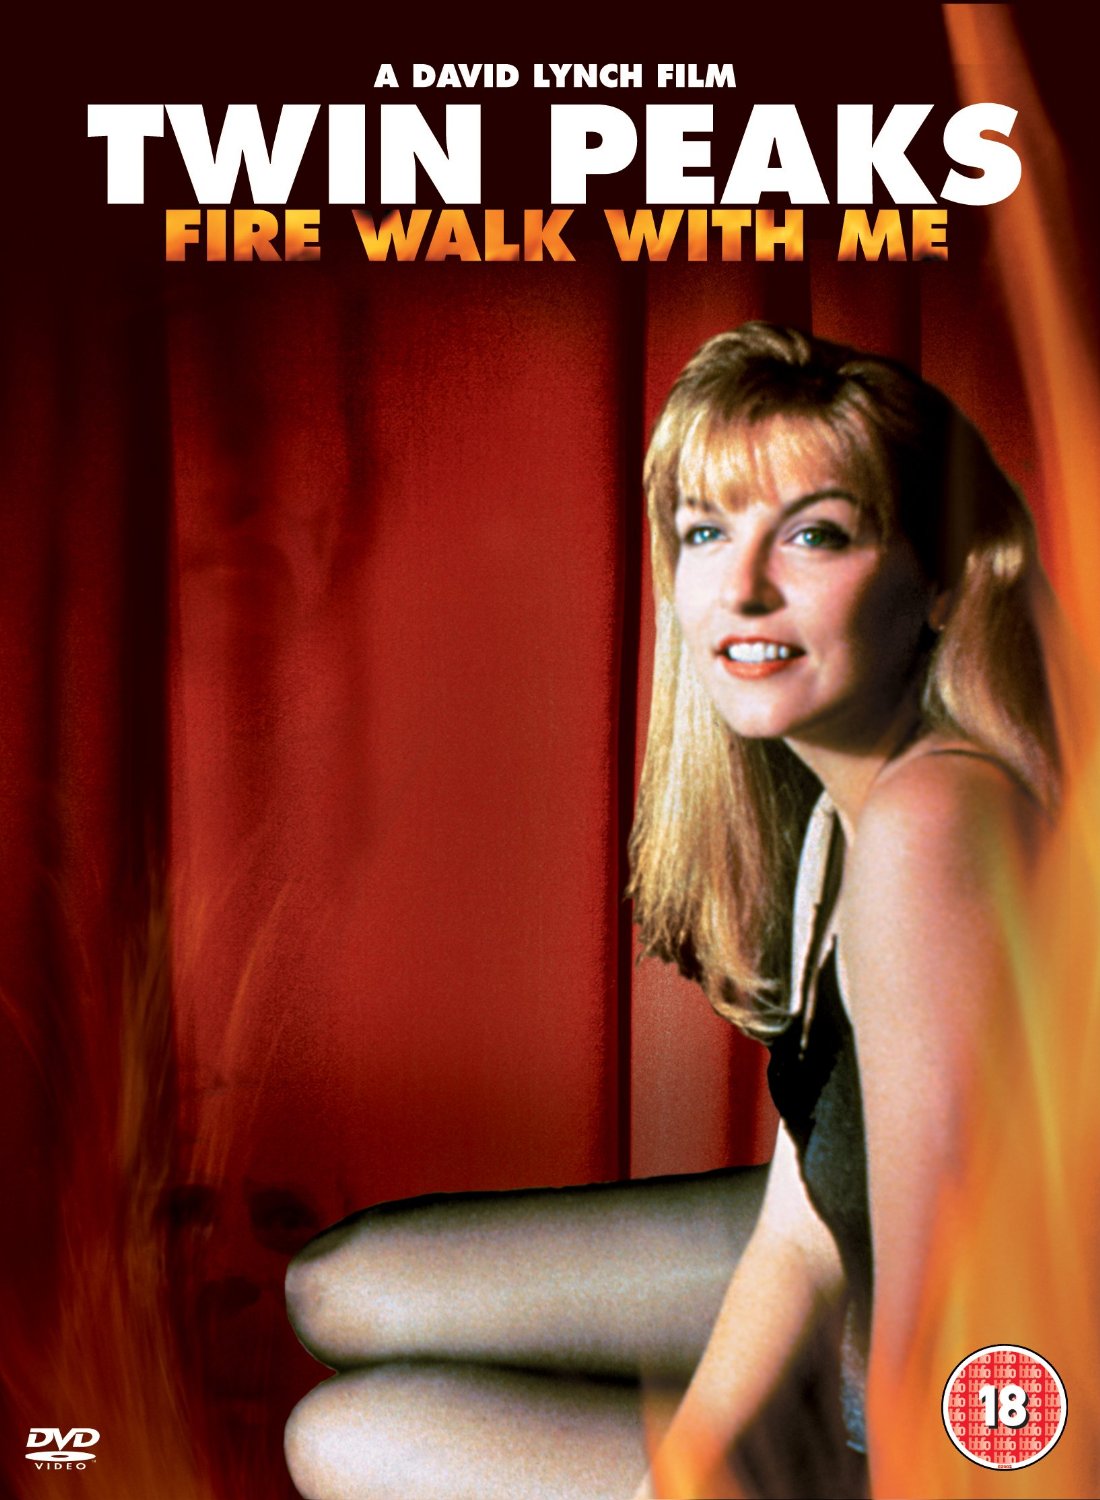 dvd-review-twin-peaks-fire-walk-with-me-1992